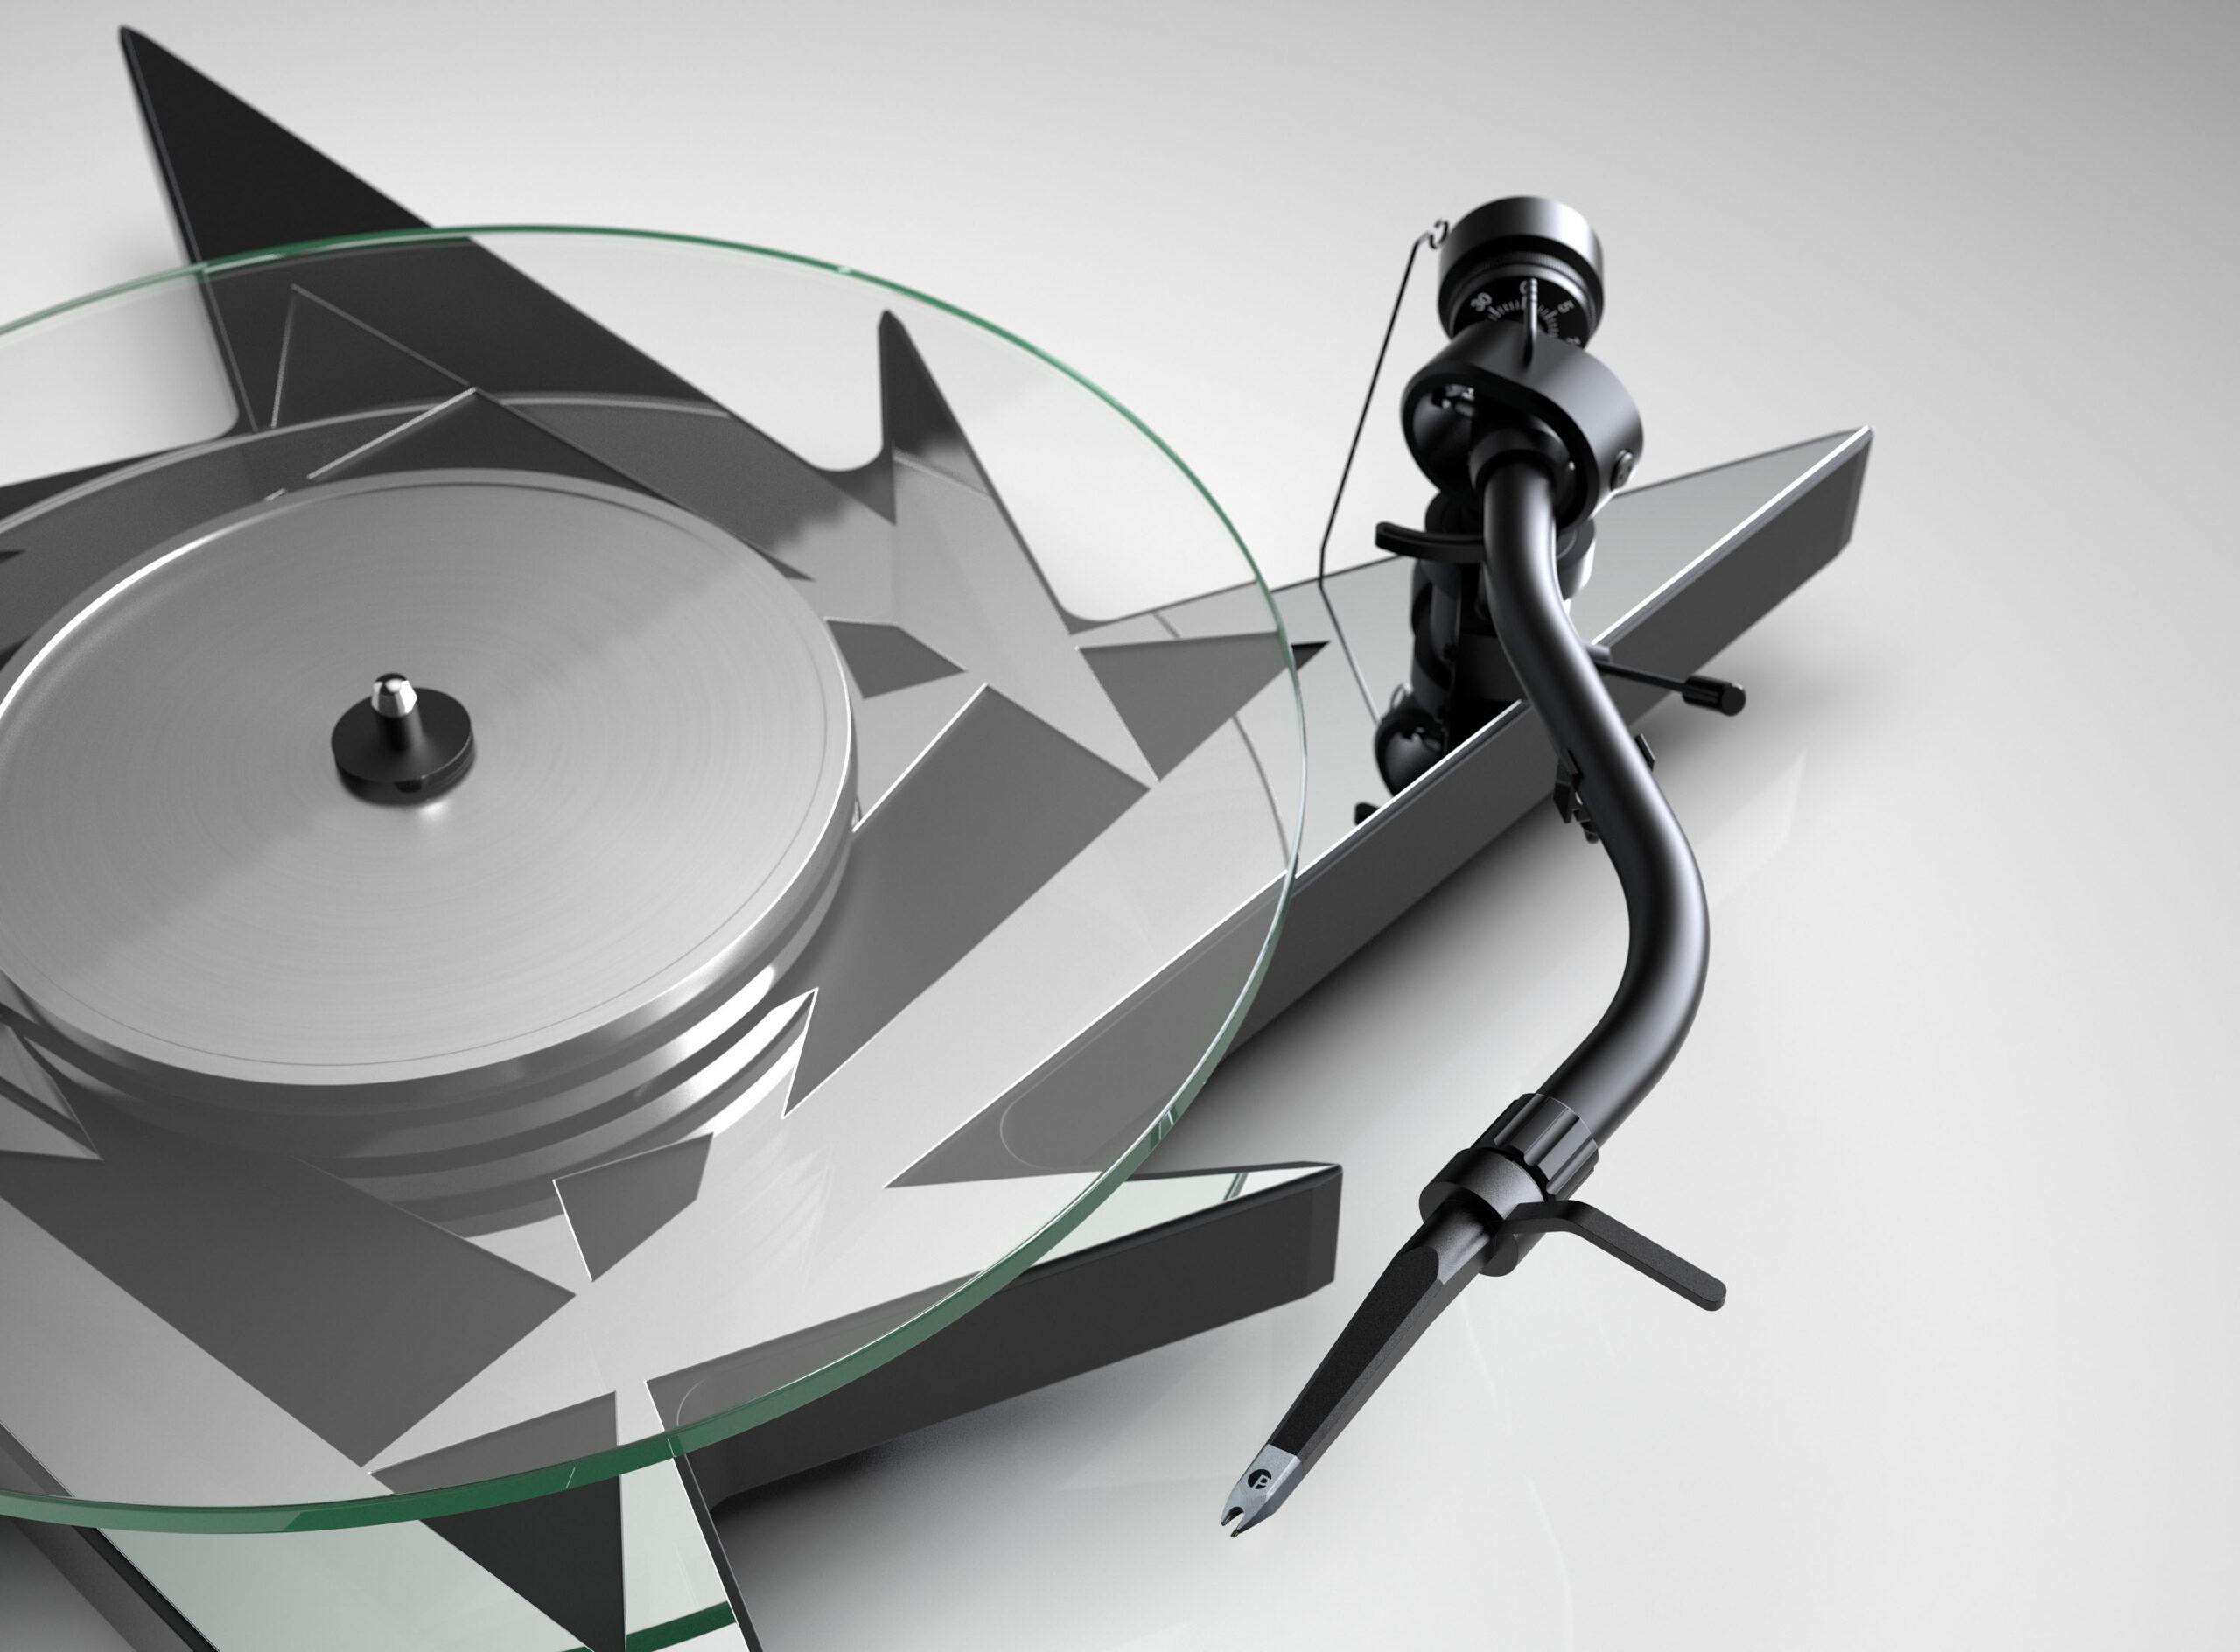 You won't mistake this turntable for any other! 98aacdd7 metallica tt closeup 4 scaled